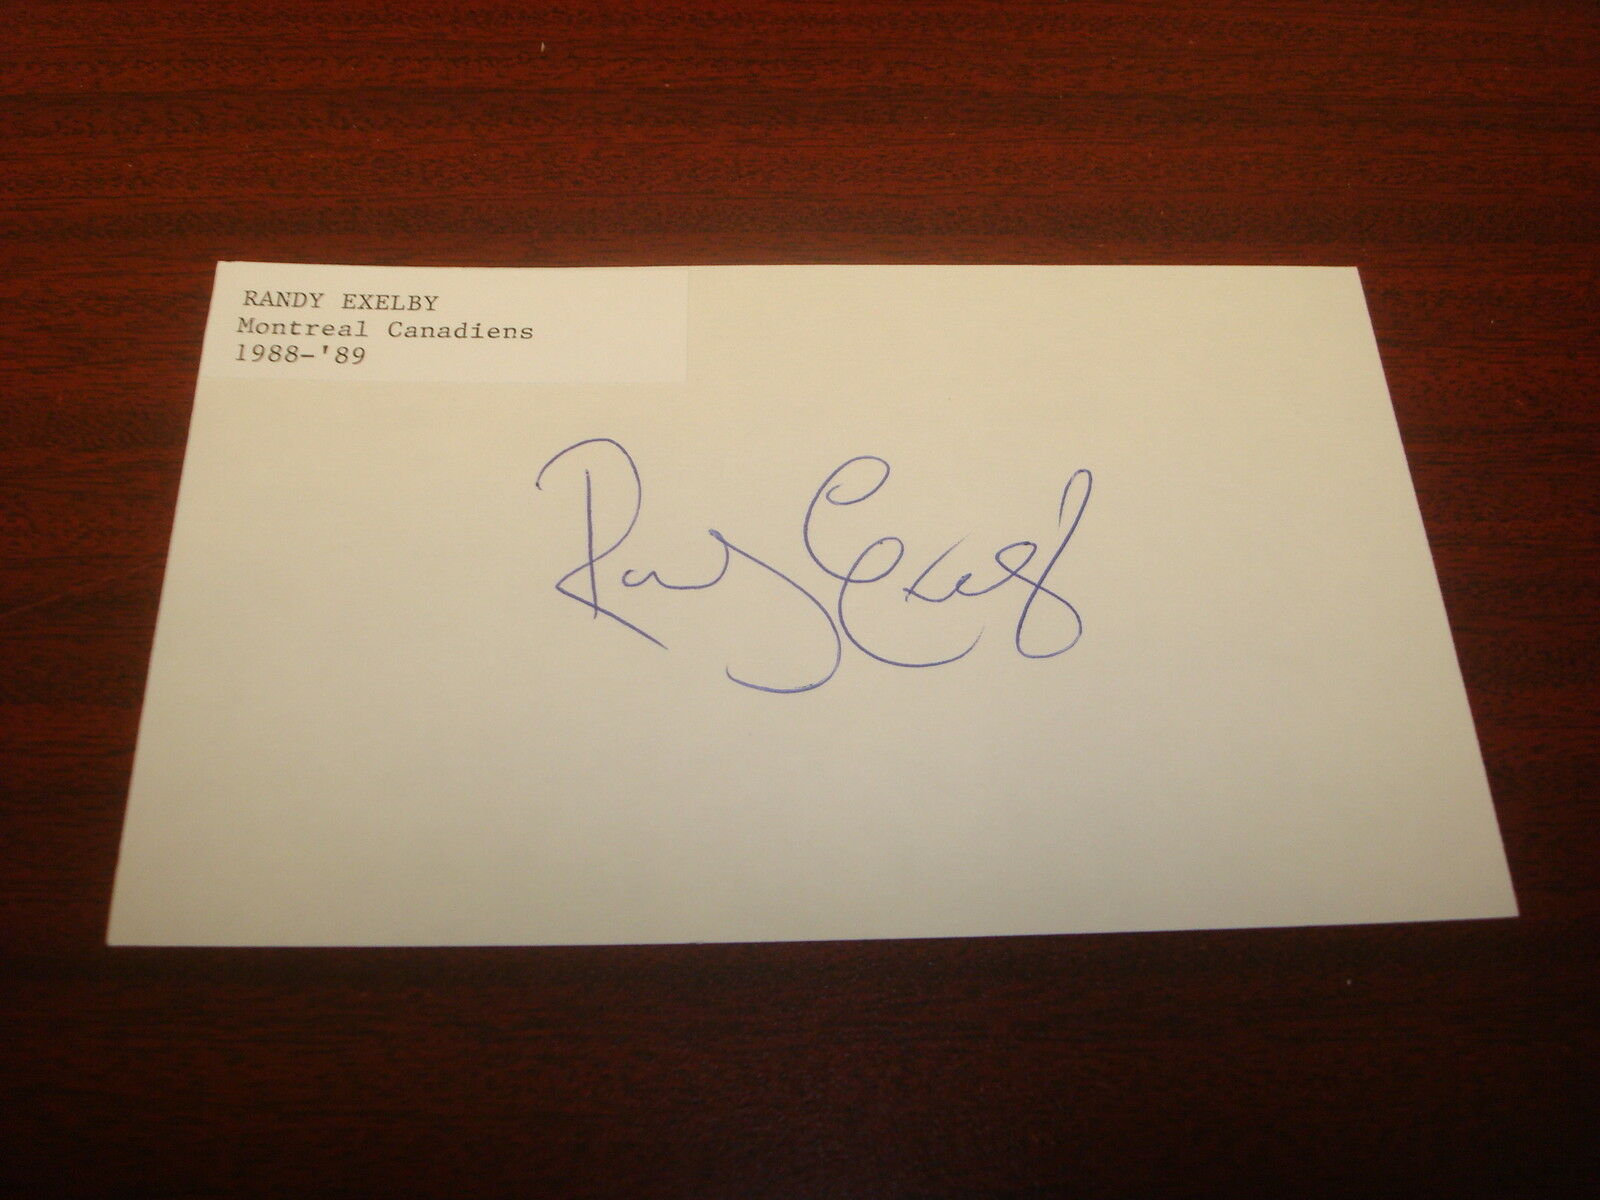 Randy Exelby 1988-1989 Canadiens Roadrunners Signed Auto 3.5x6 Index Card An